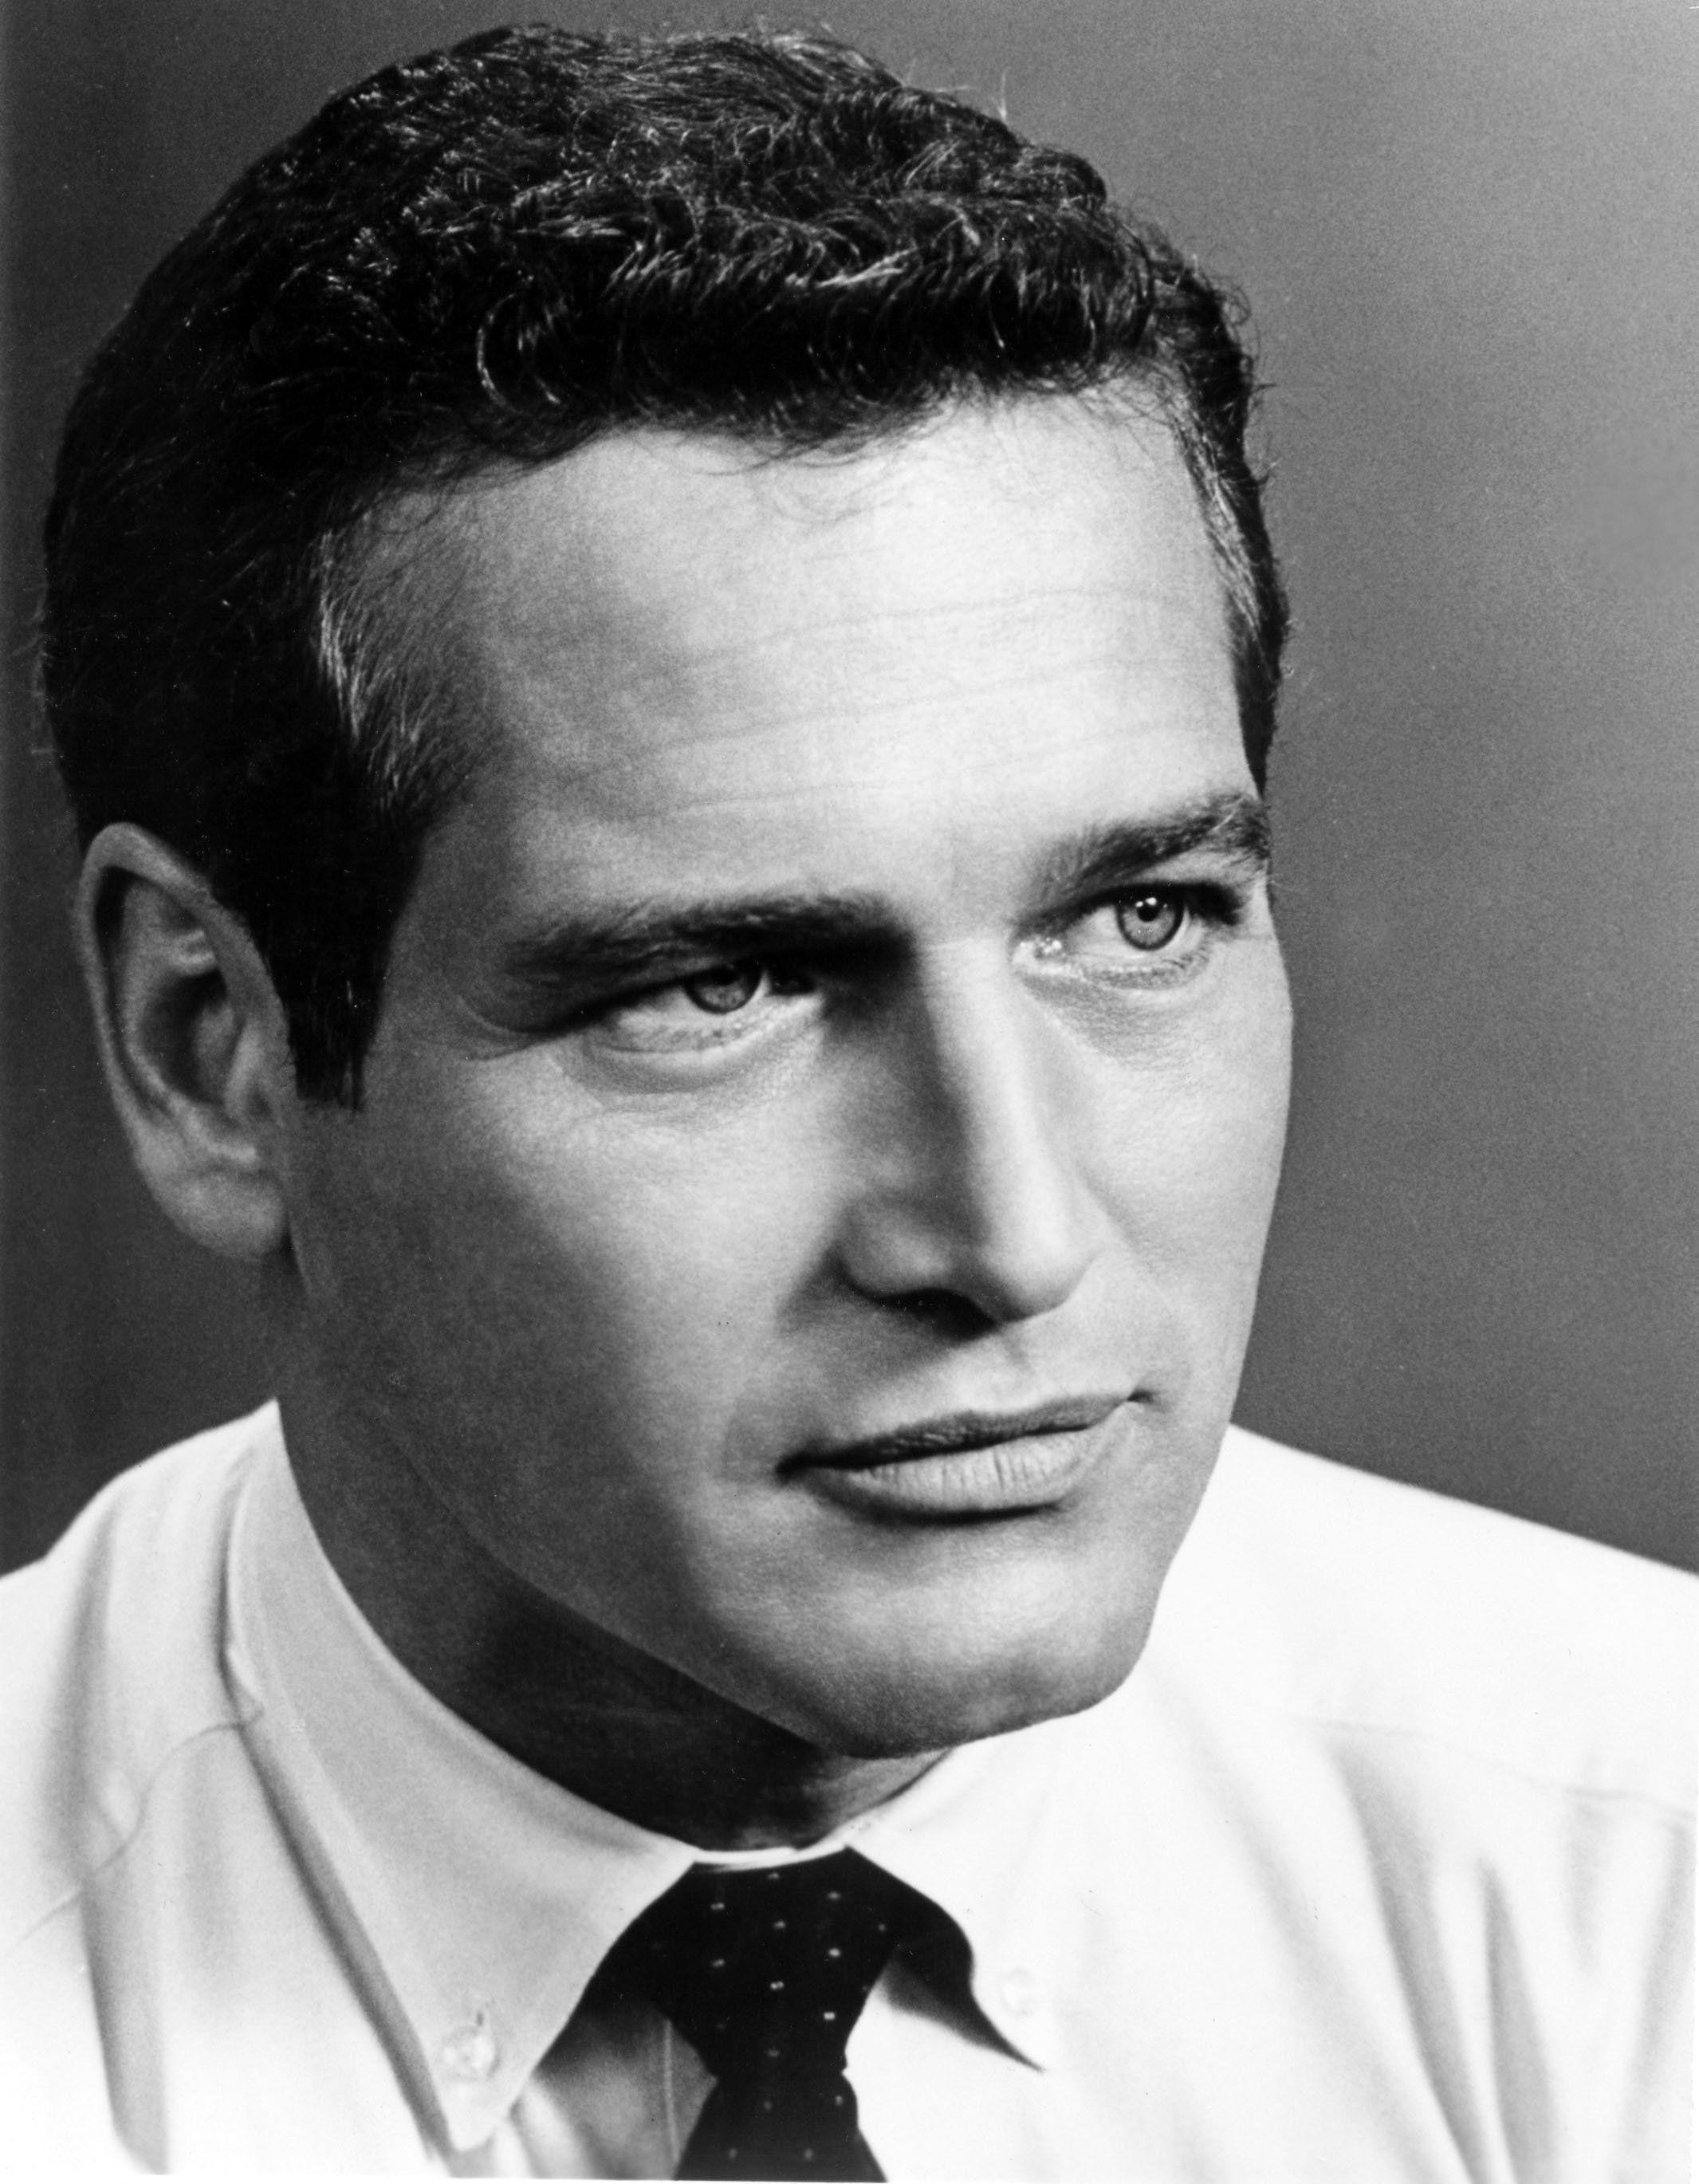 Awesome Paul Newman HD Wallpaper Free Download